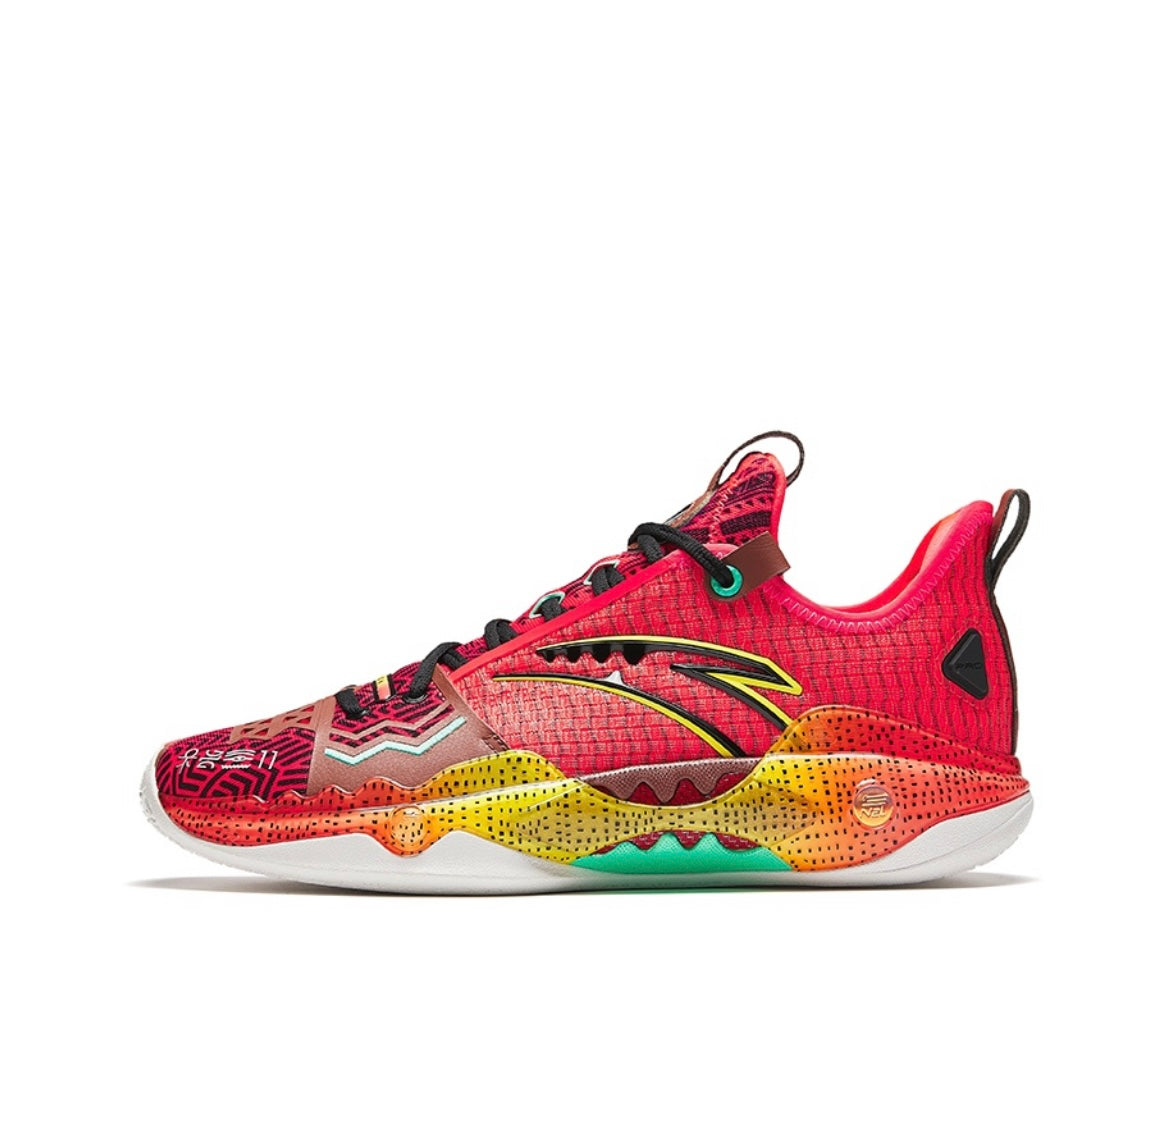 Kyrie Irving x Anta Shock Wave 5 Pro - Strength